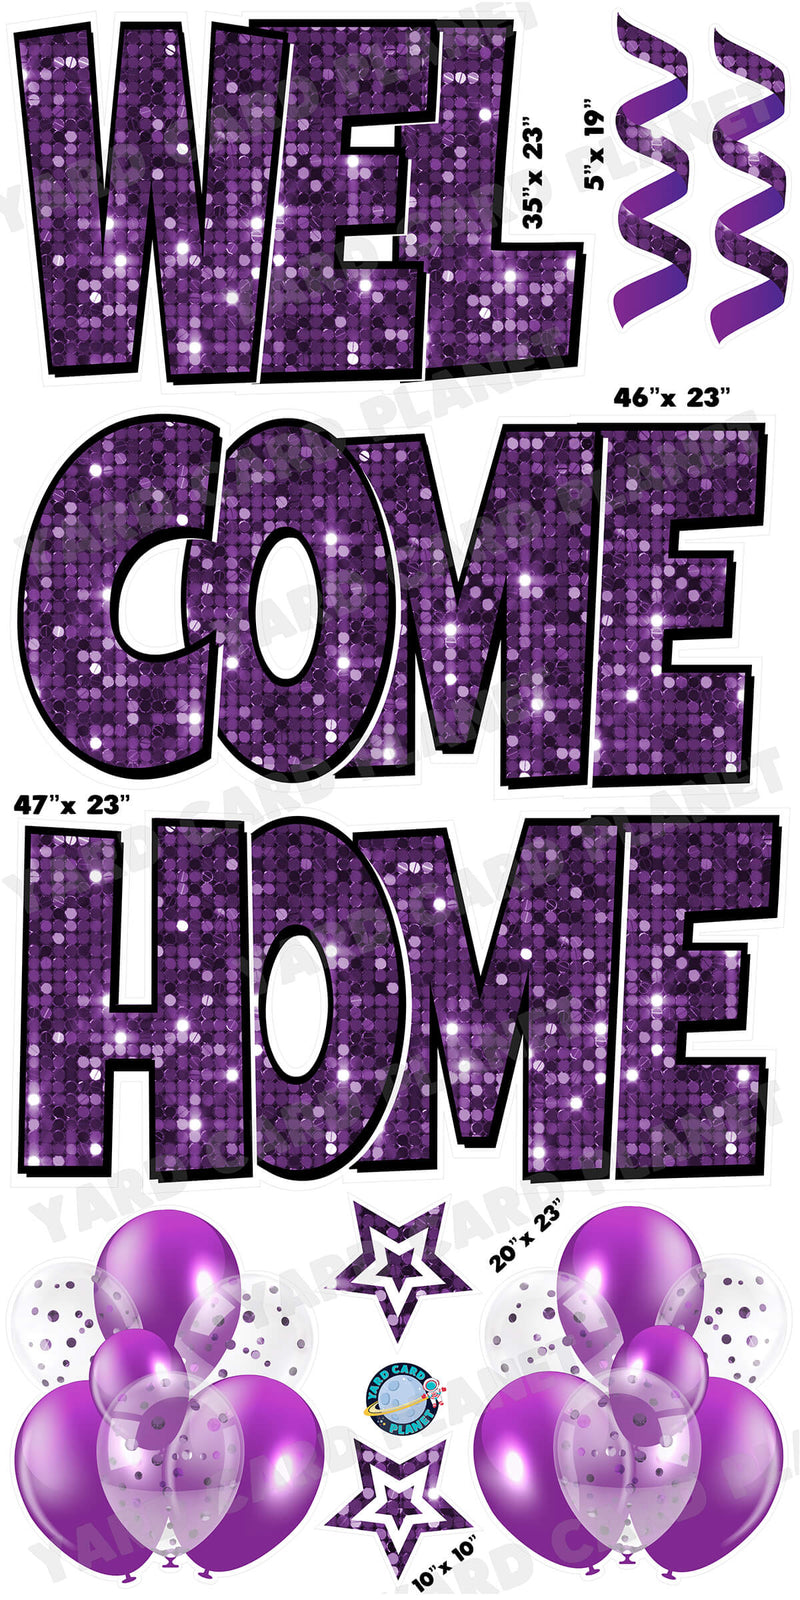 Large 23" Welcome Home Yard Card EZ Quick Sets in Luckiest Guy Font and Flair in Purple Sequin Pattern